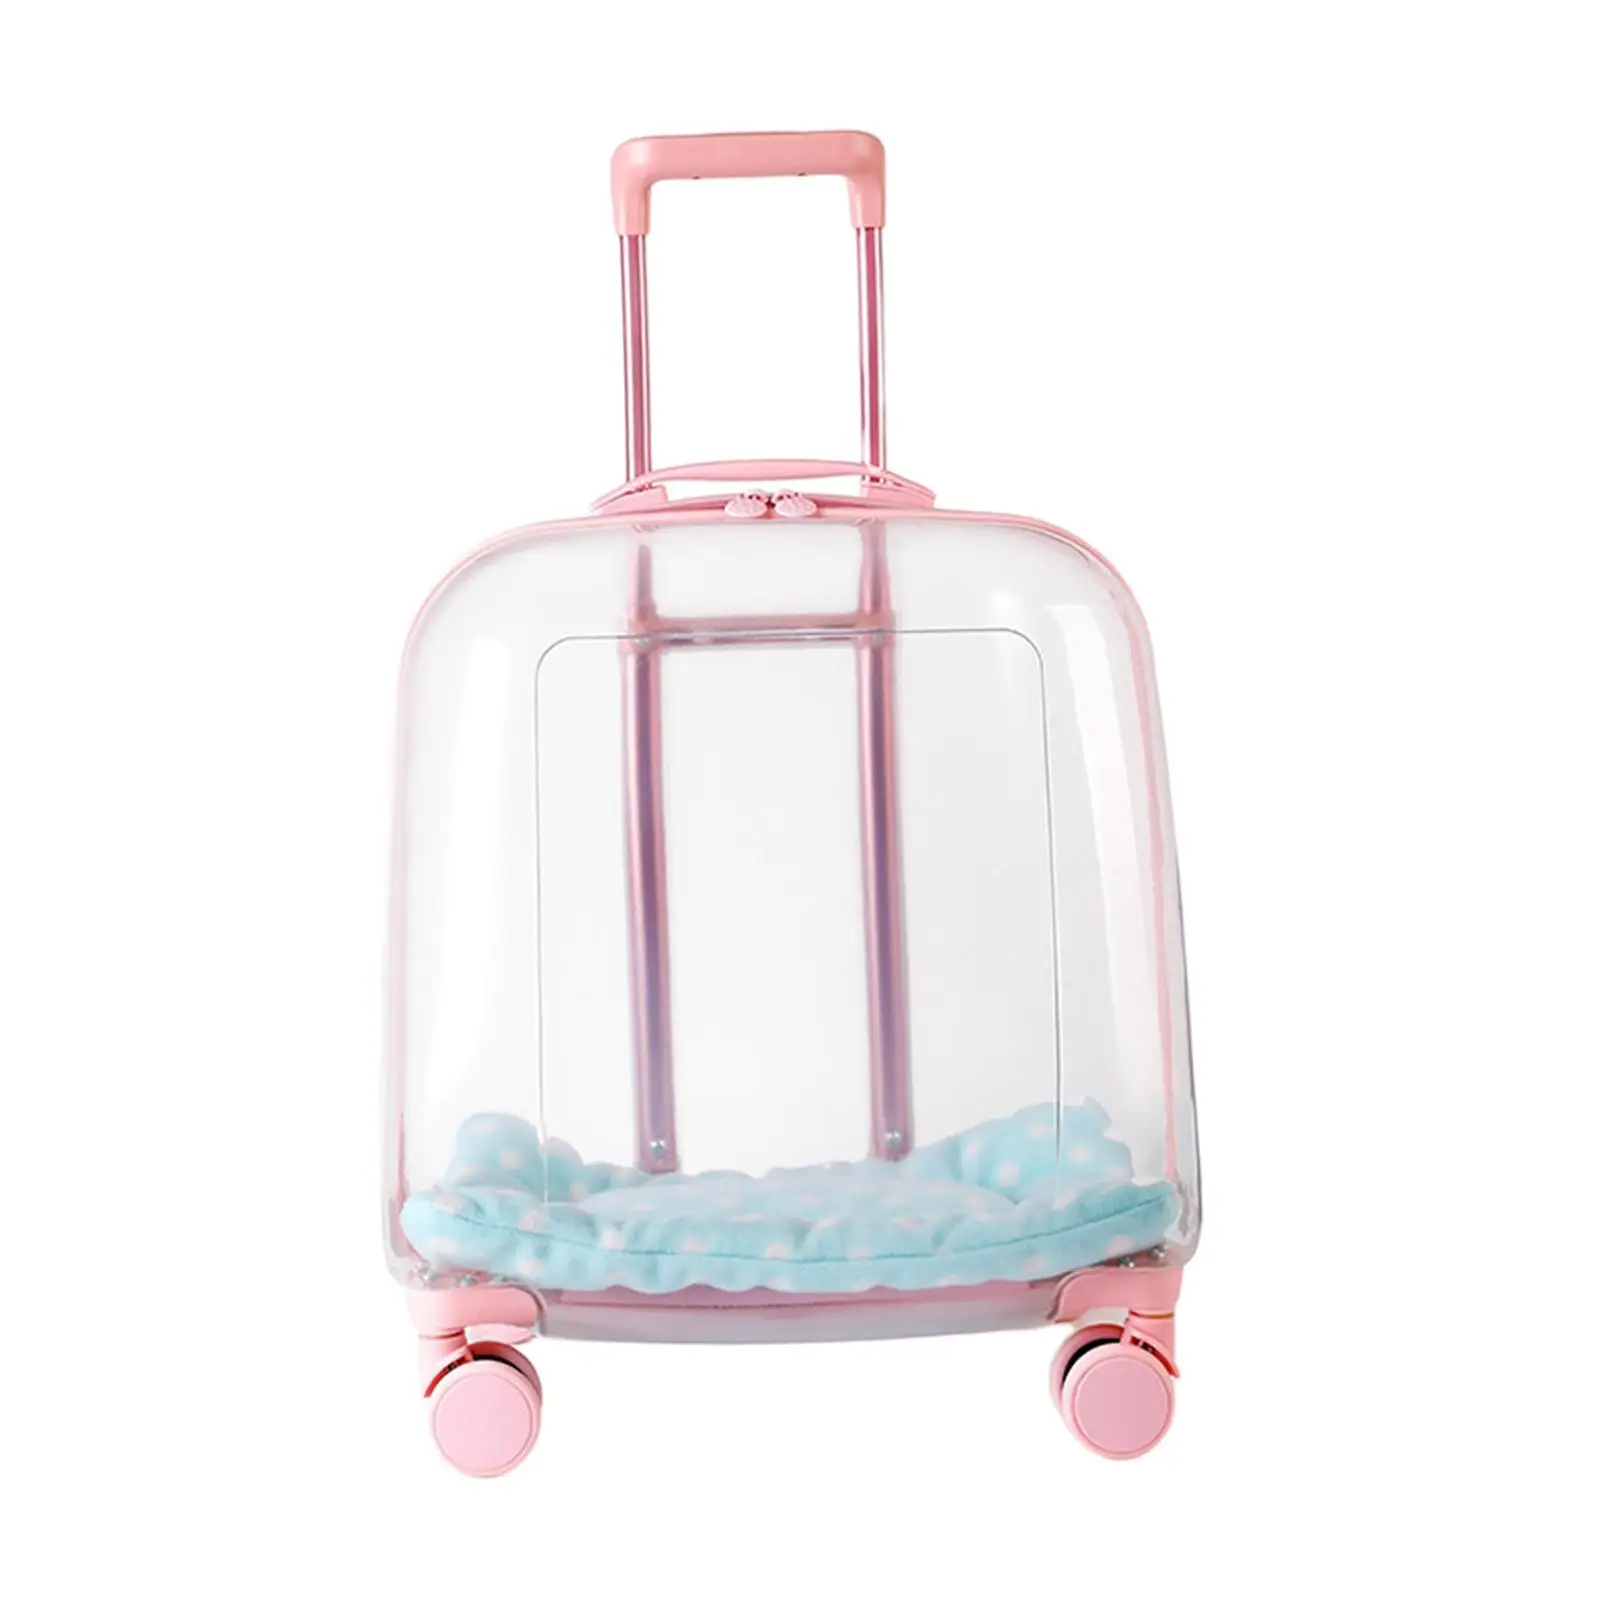 Lightweight Cat Trolley Case Dog Kennel with Silent Wheel Hard Pet Carrier for Kitten Kitty Small Animals Puppy Travel Hiking